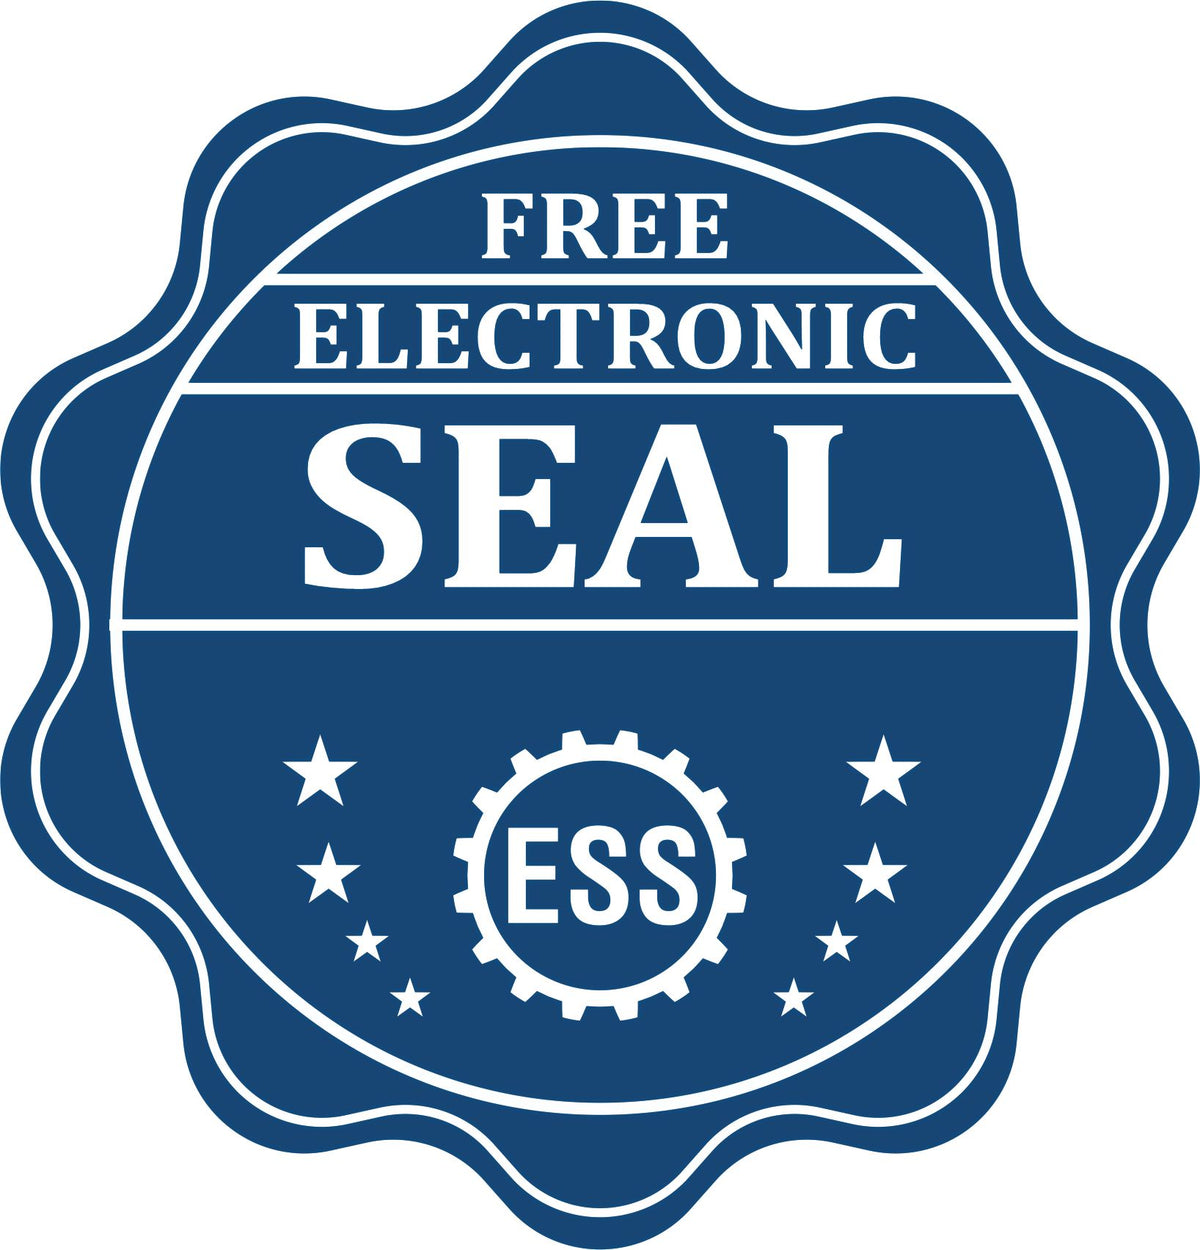 A badge showing a free electronic seal for the Heavy Duty Cast Iron New Jersey Geologist Seal Embosser with stars and the ESS gear on the emblem.